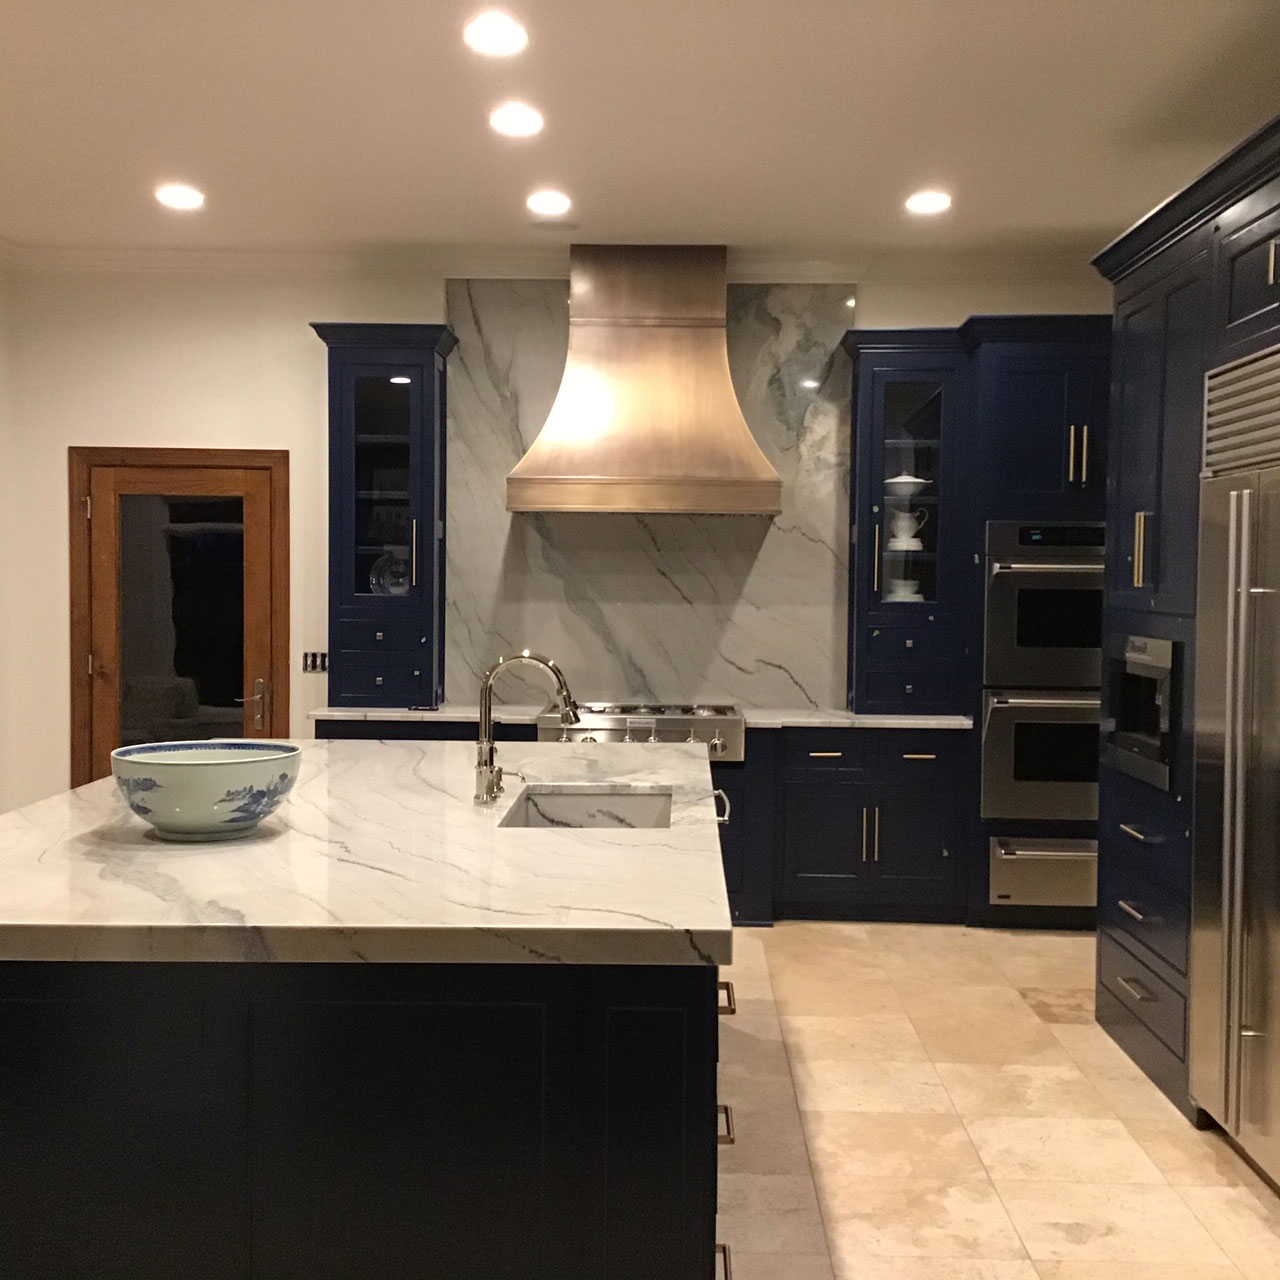 French kitchen design with blue kitchen cabinets,elegant marble kitchen countertops captivating marble backsplash, topped off with a range hood